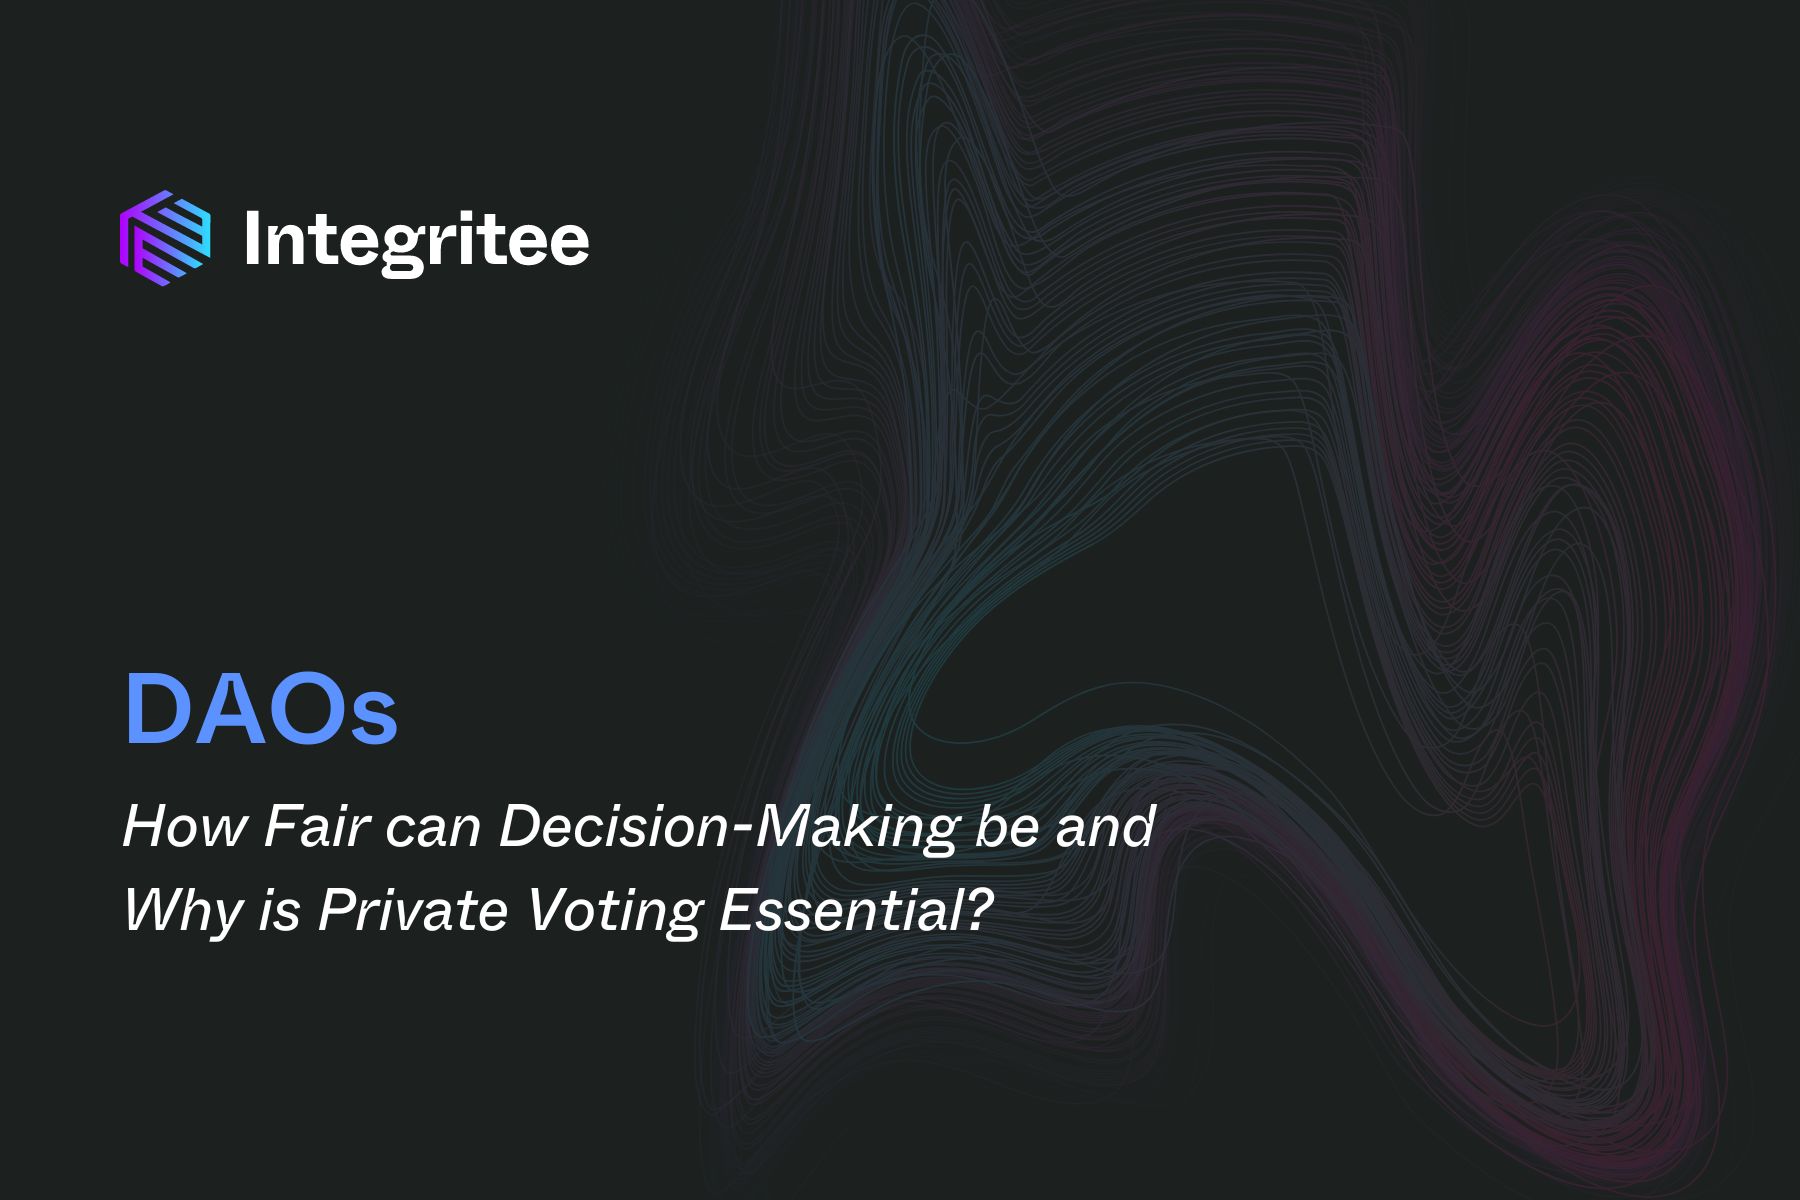 DAOs: How Fair can Decision-Making be and Why is Private Voting Essential?